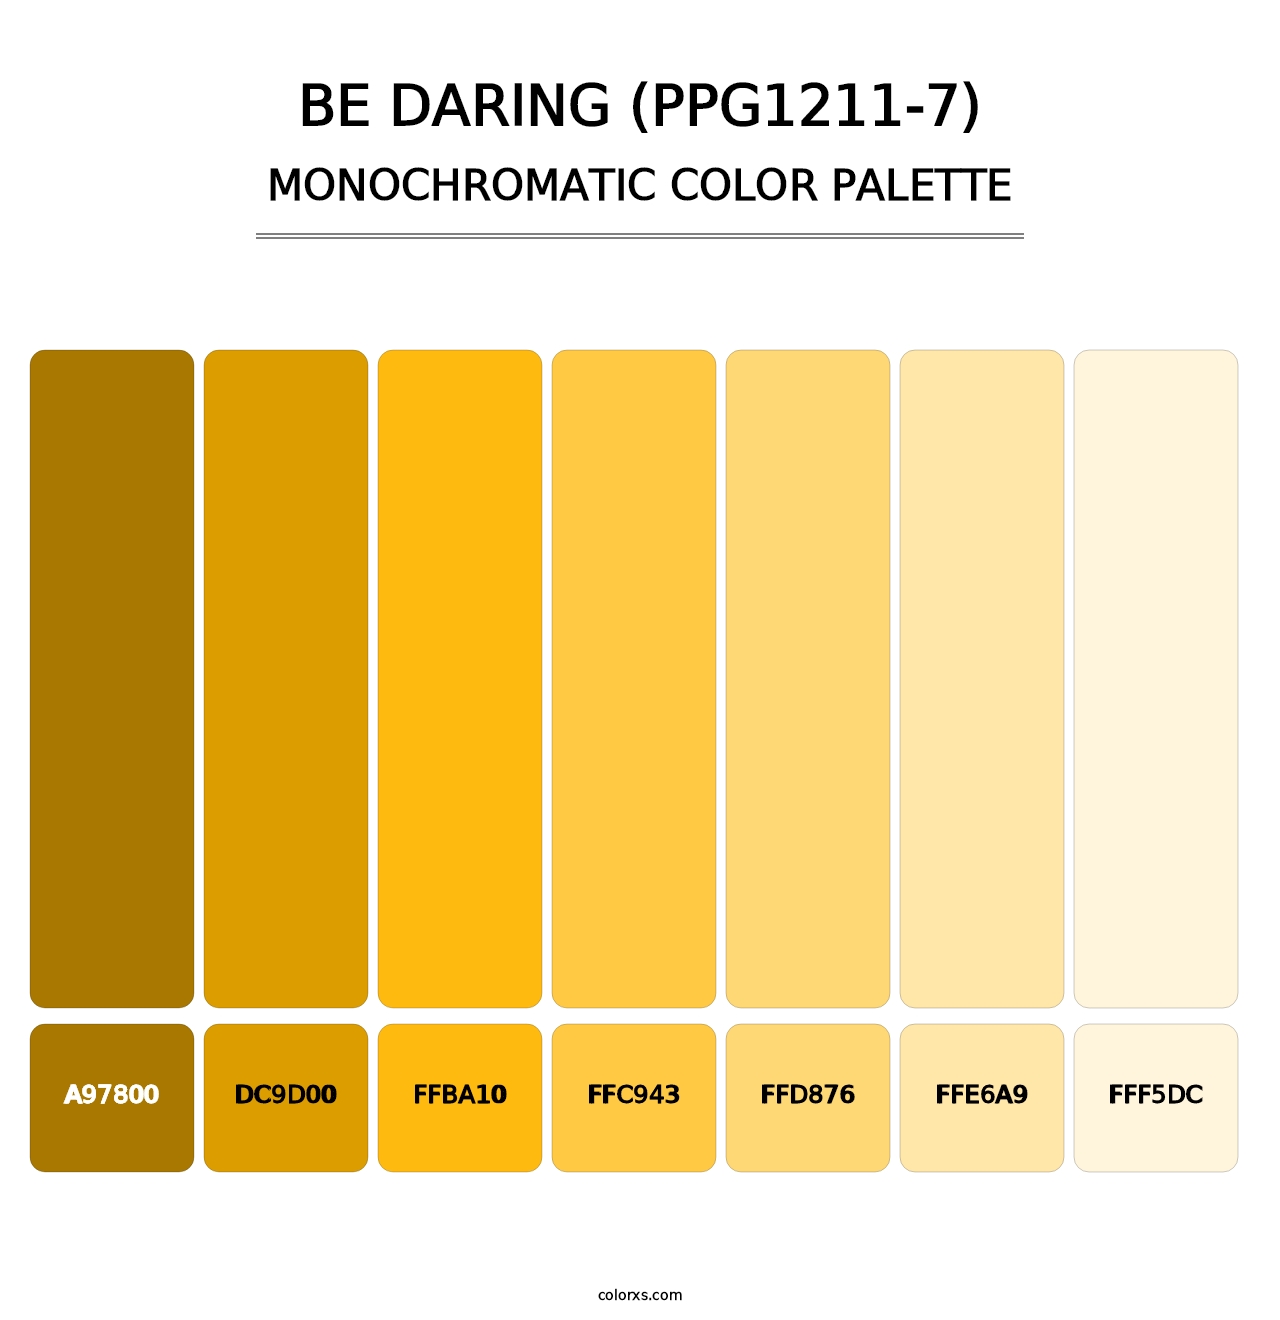 Be Daring (PPG1211-7) - Monochromatic Color Palette